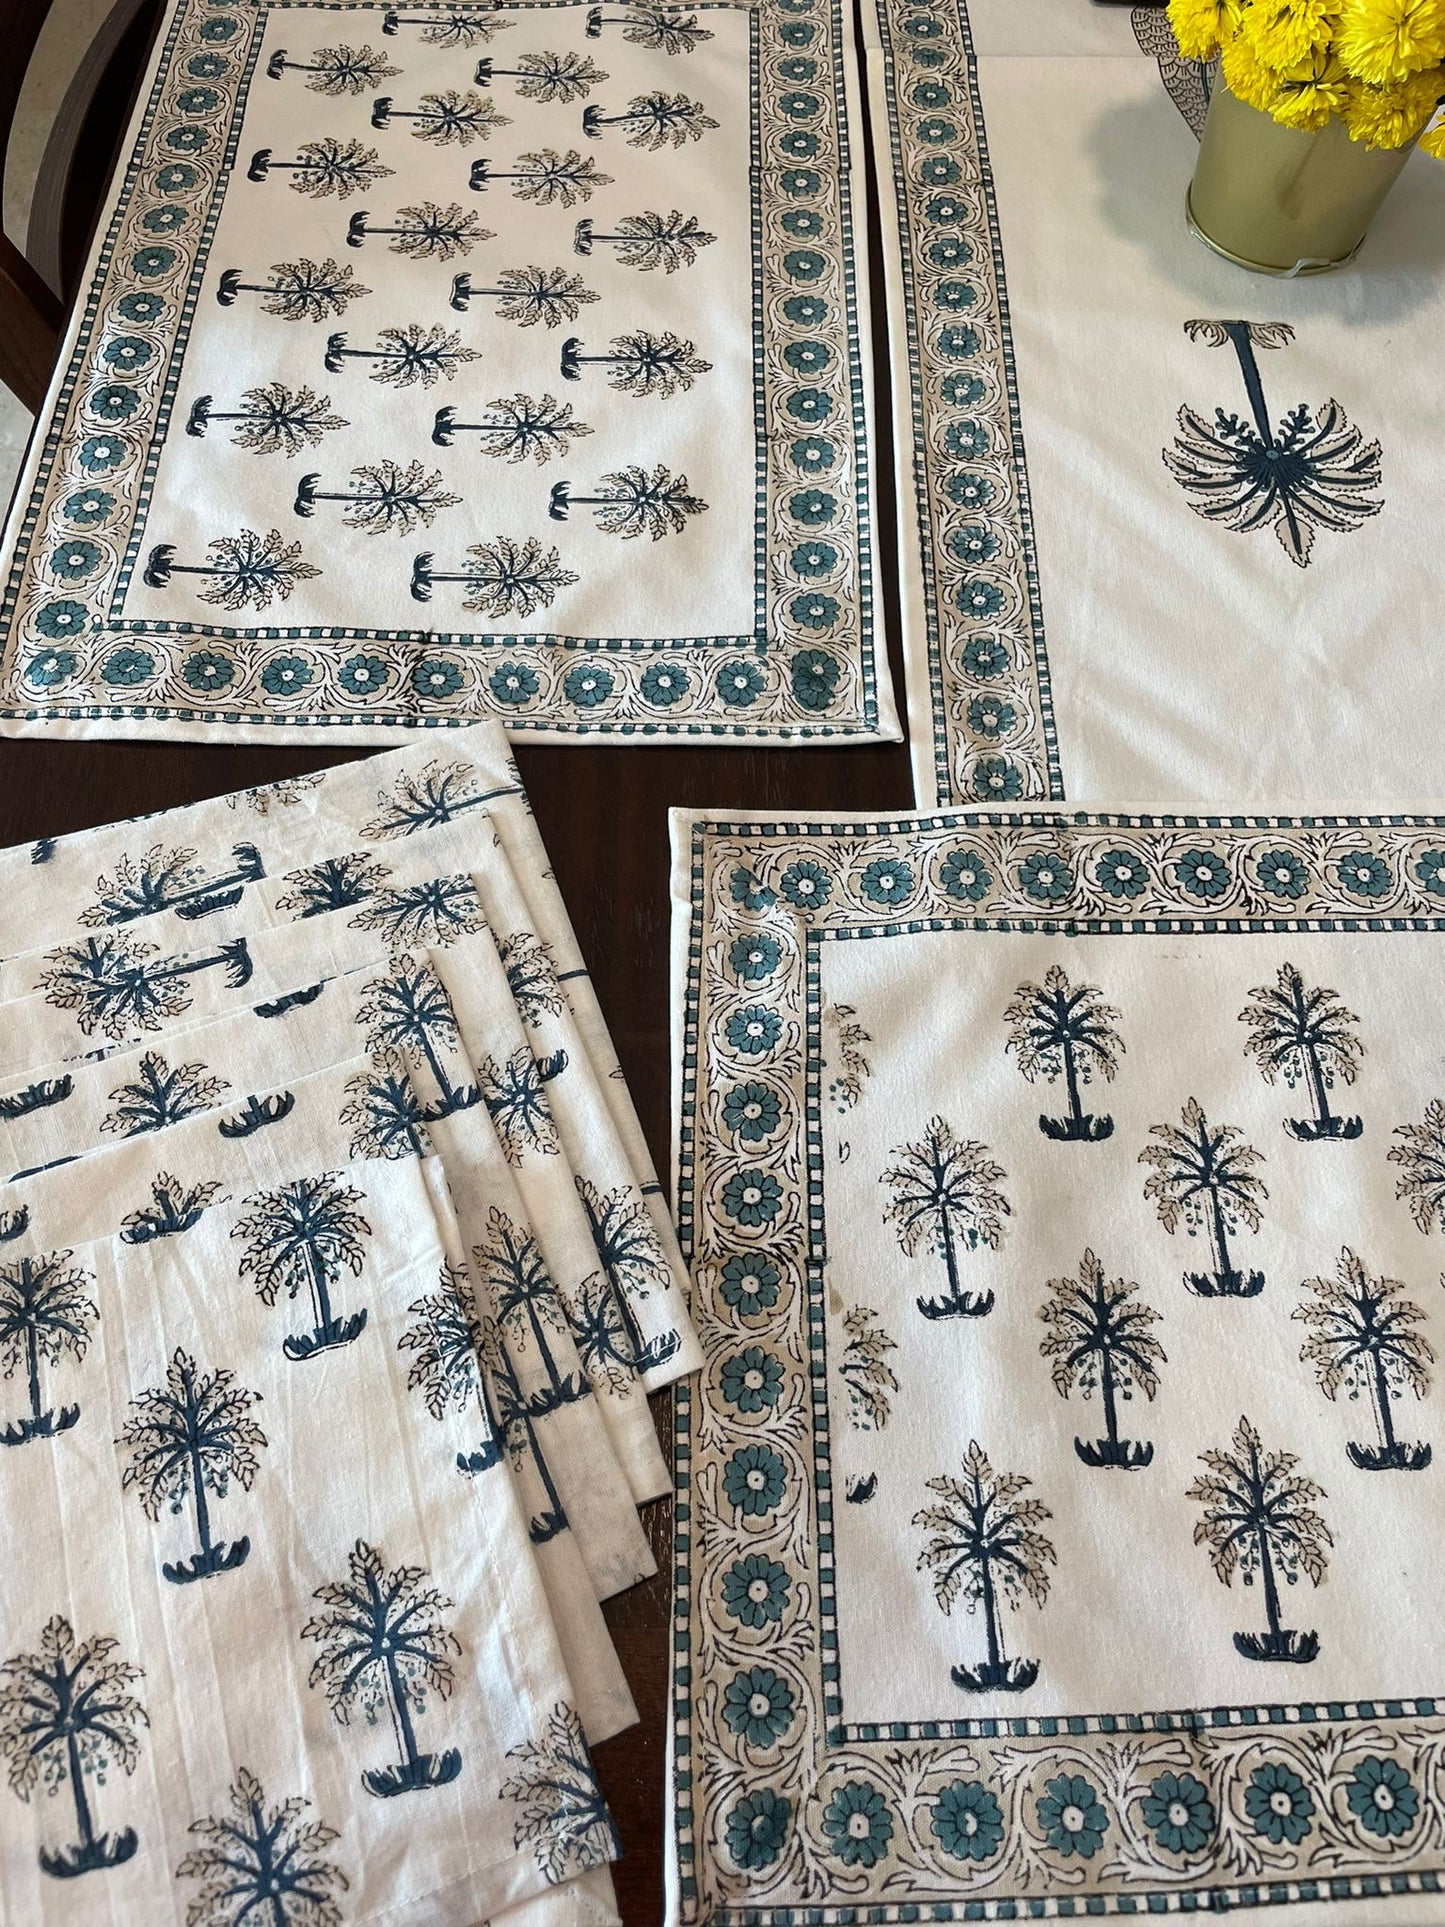 Runner + Placemats + Napkins (Set) - The Blue Orchard